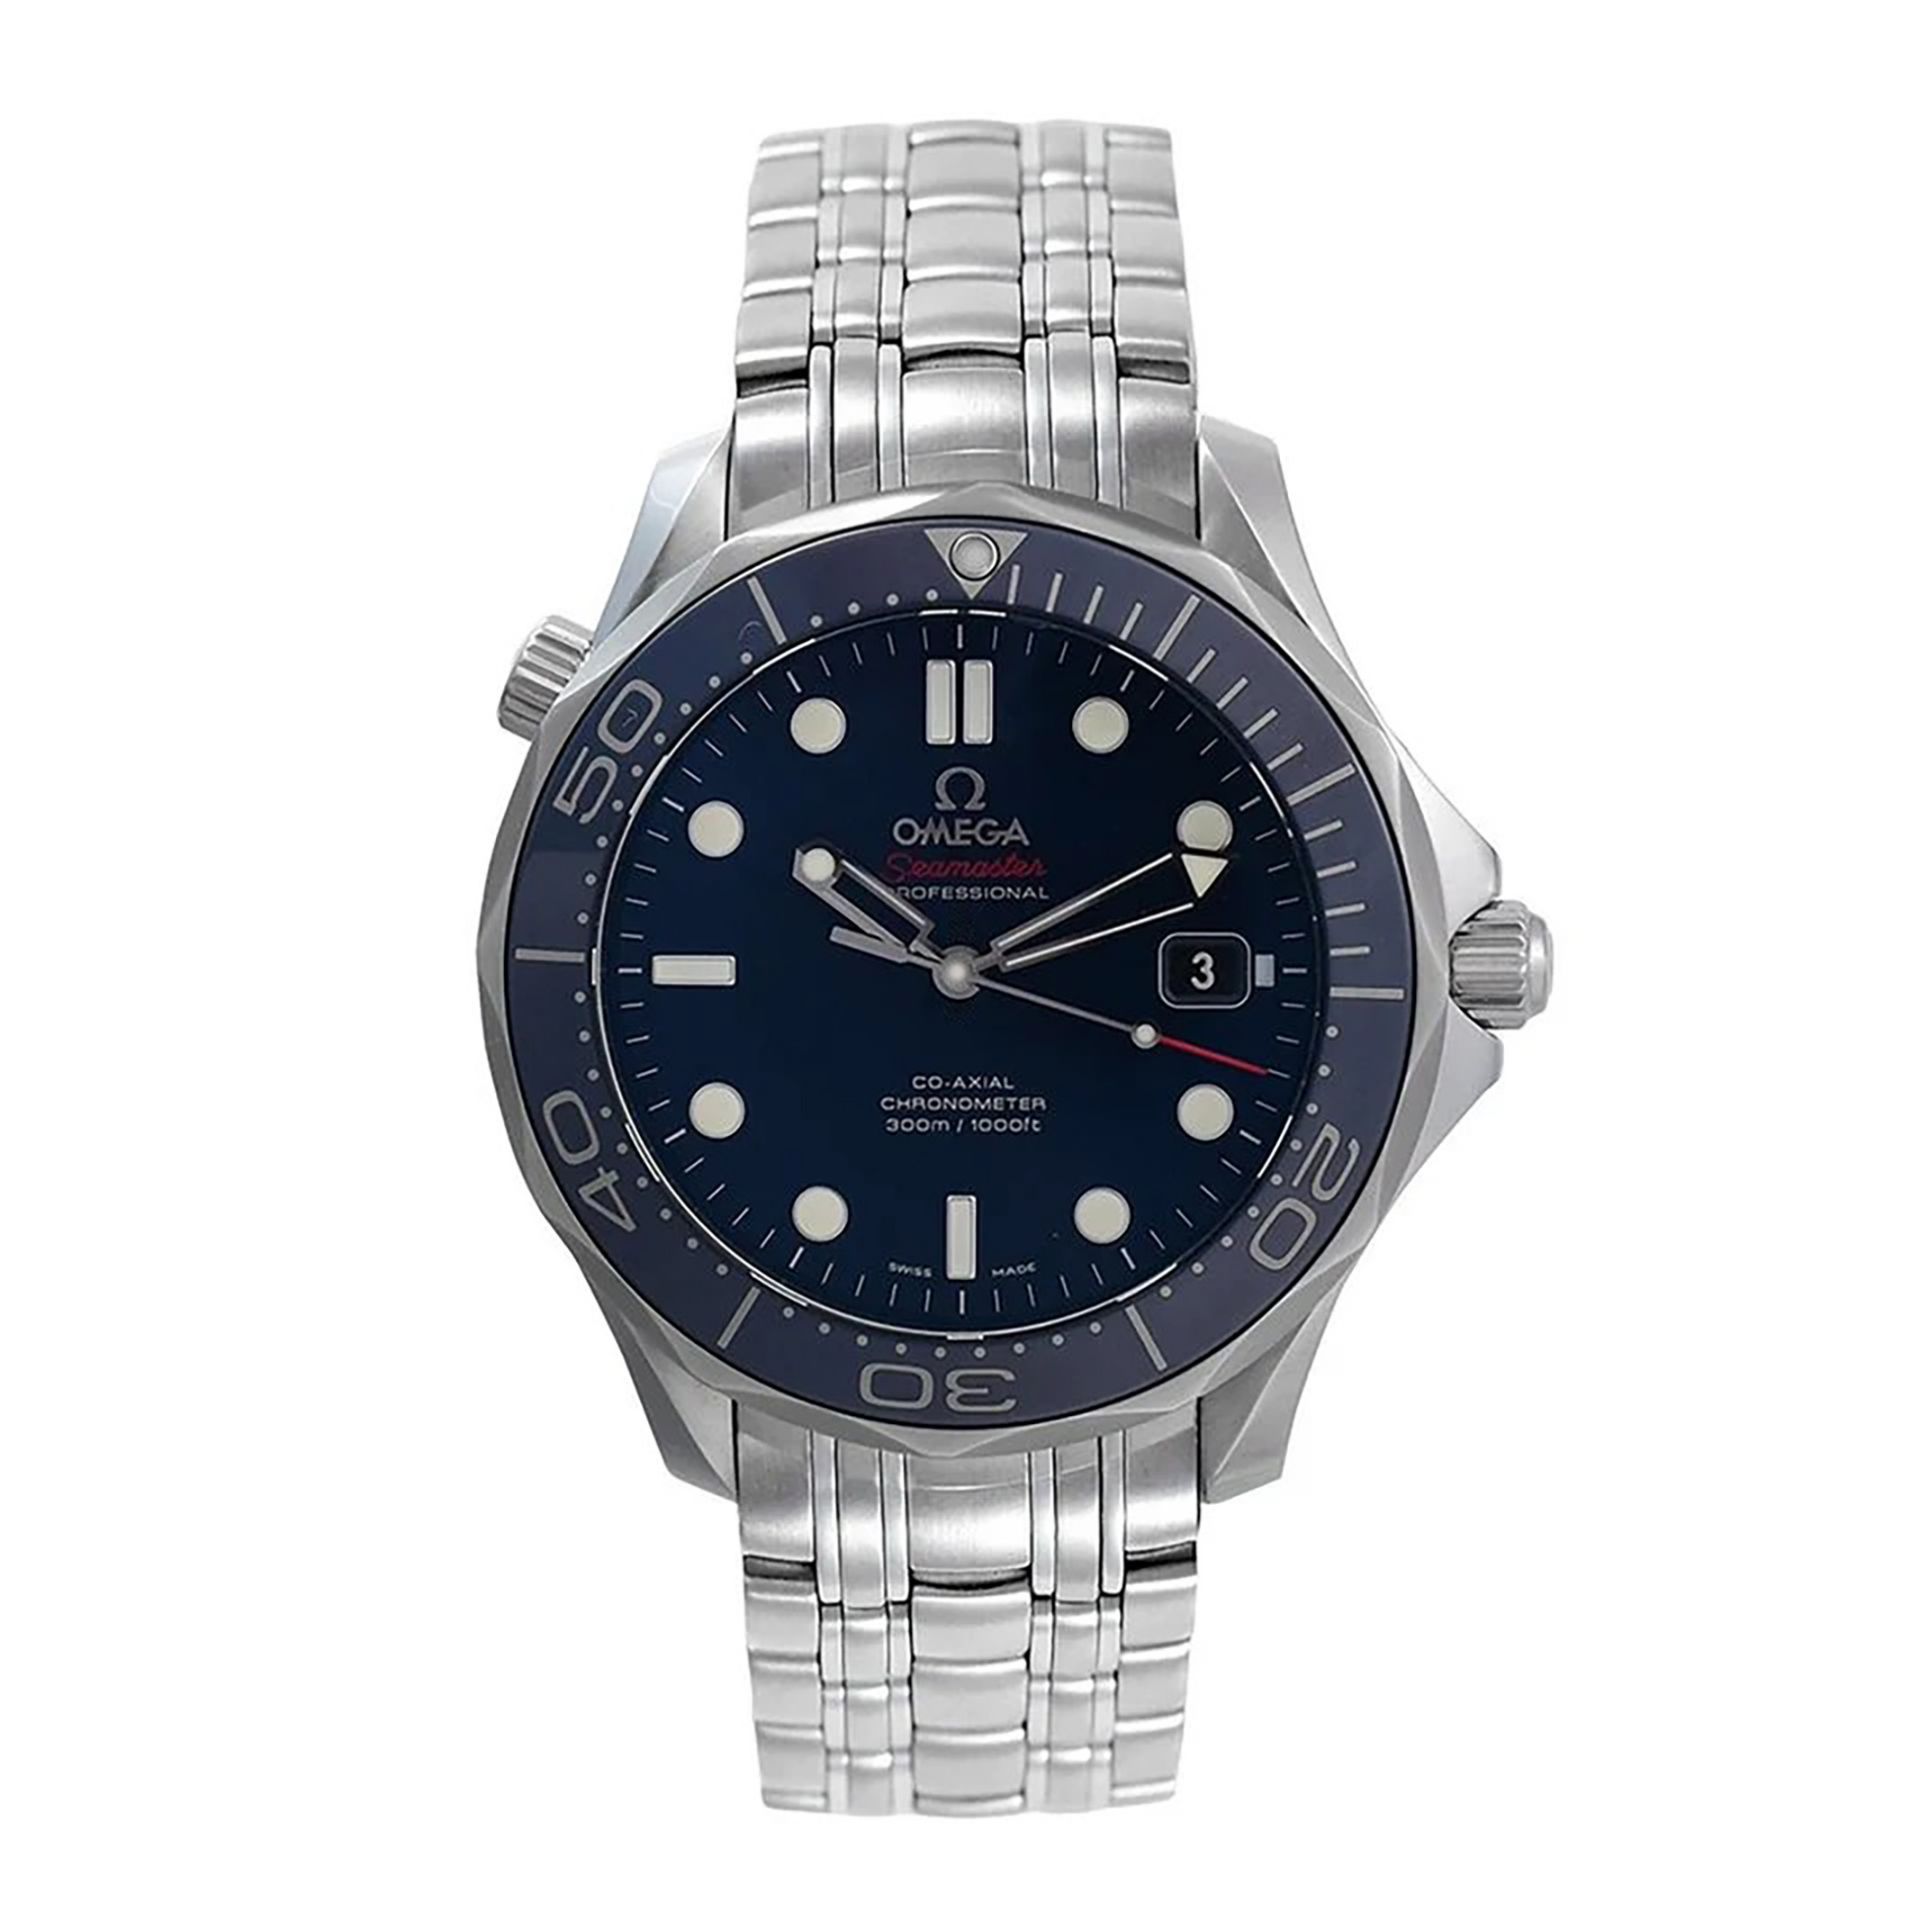 Omega Seamaster Diver 300 M wristwatch, in stainless steel